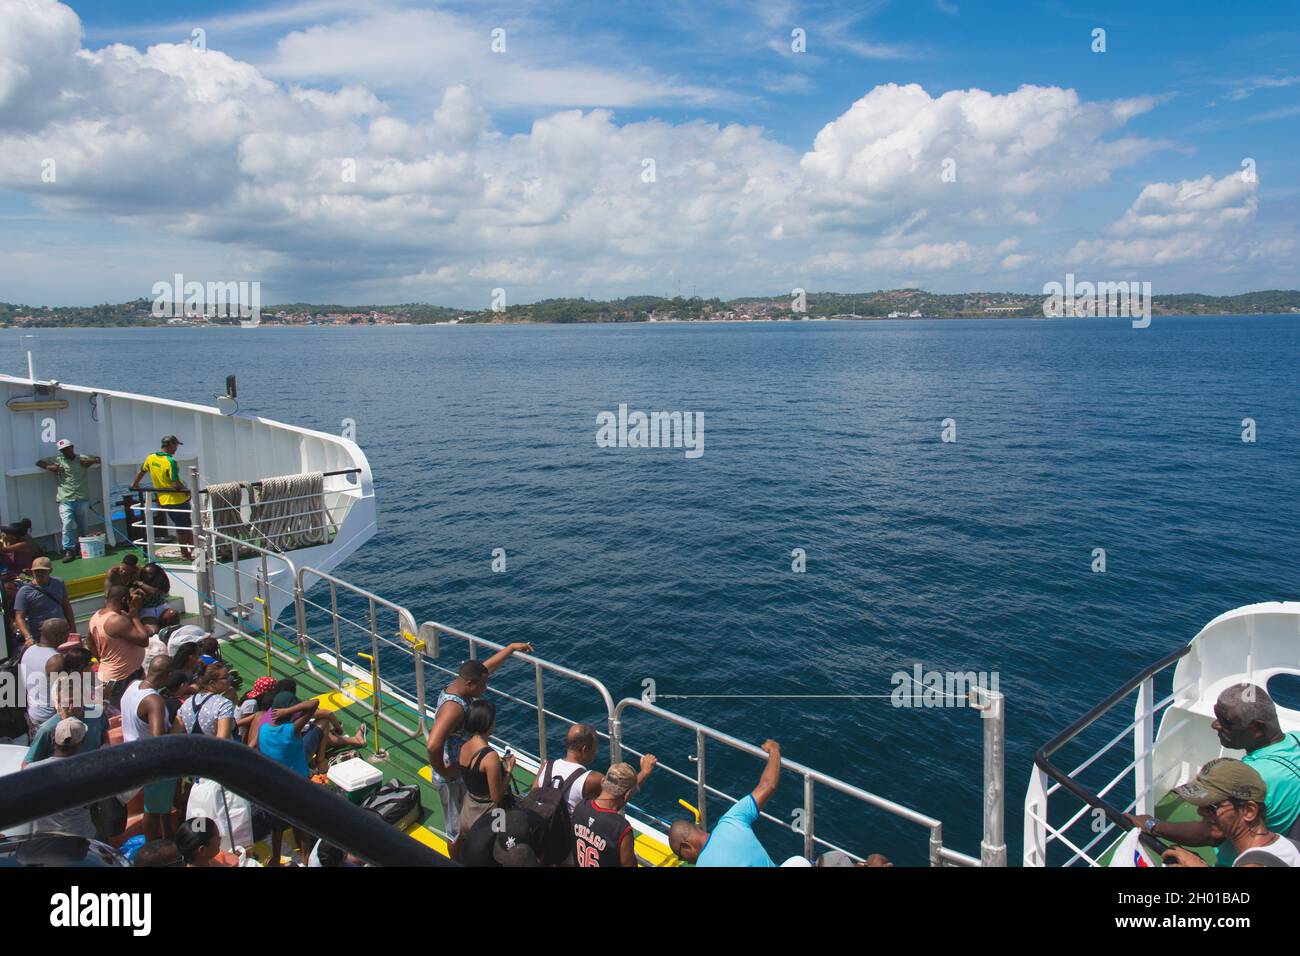 Salvador, Bahia, Brazil - December 30, 2018: Passengers on the ferry boat enjoying the view of the famous Itaparica Island in Salvador, Bahia. Stock Photo